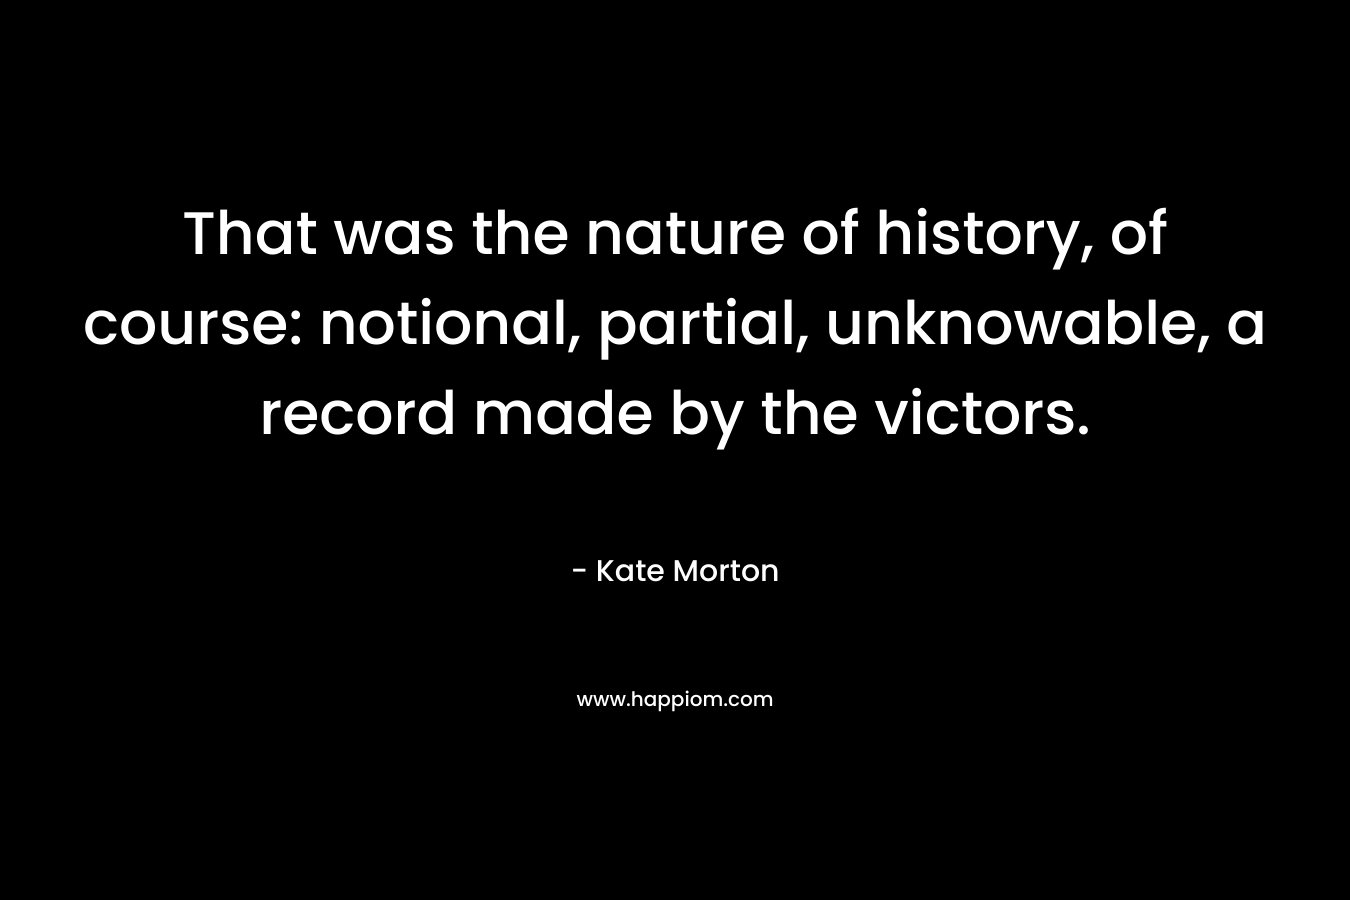 That was the nature of history, of course: notional, partial, unknowable, a record made by the victors.